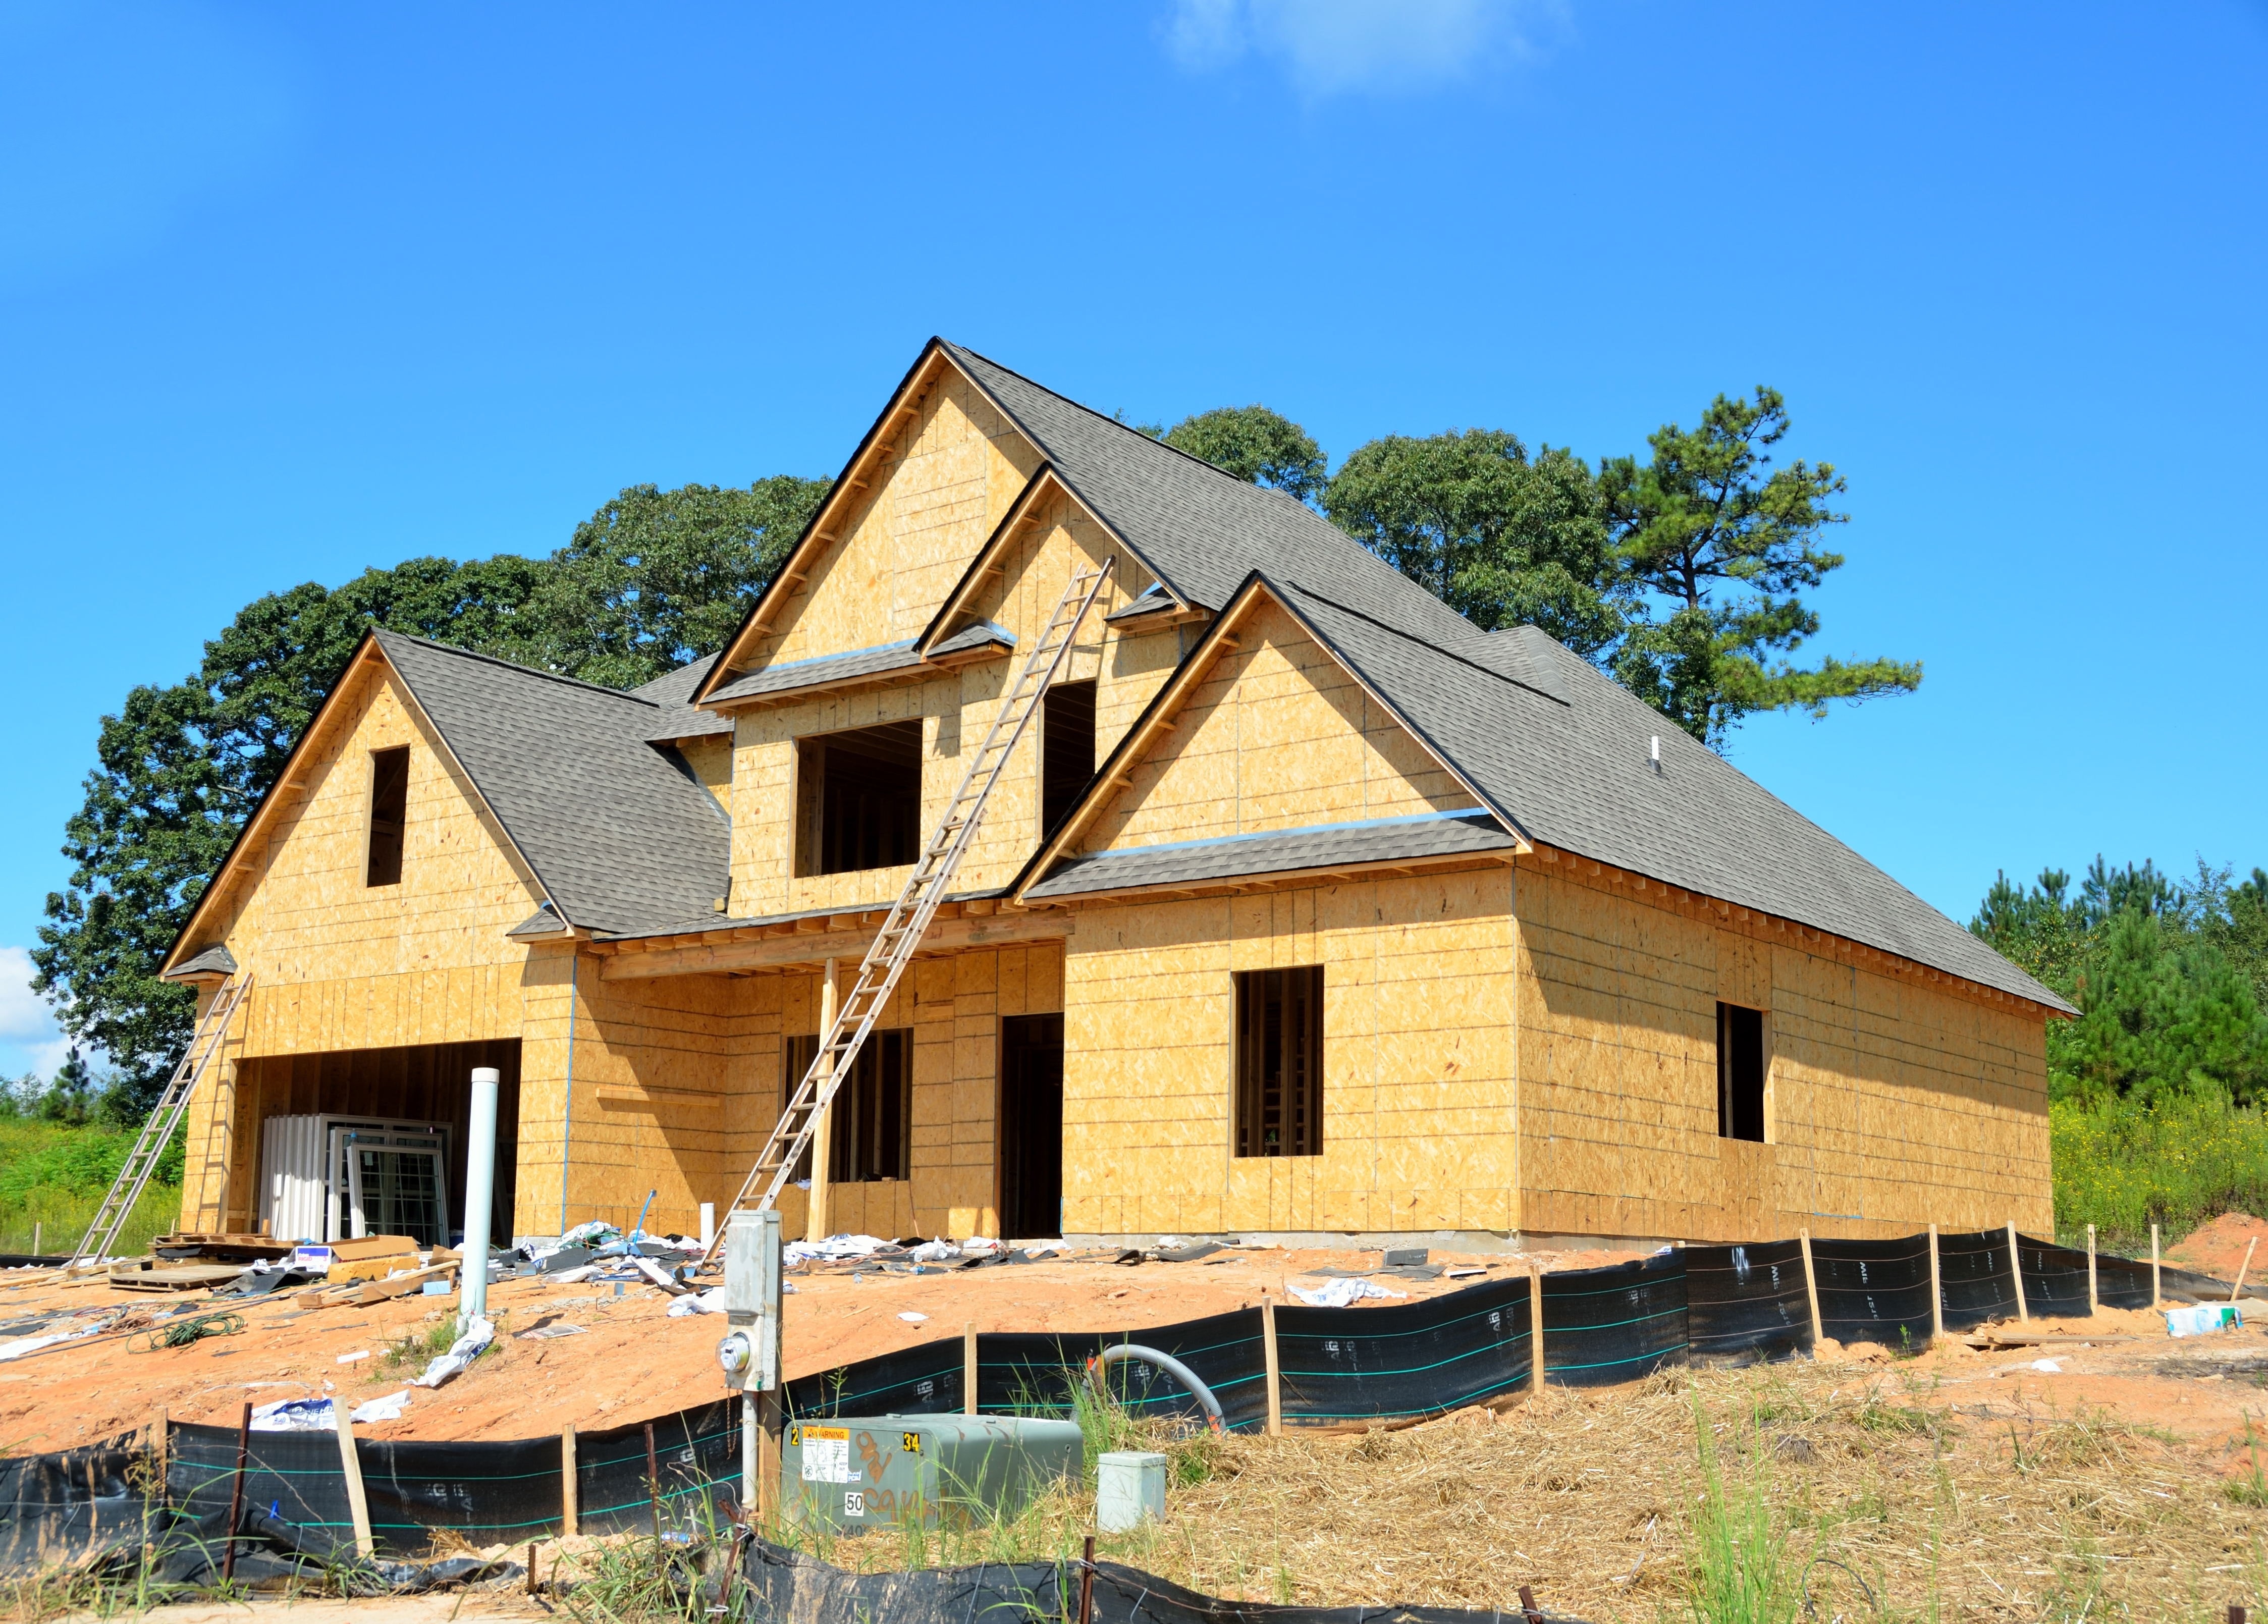 Masonry or frame construction - which is the more expensive home to insure?  - Chrinco